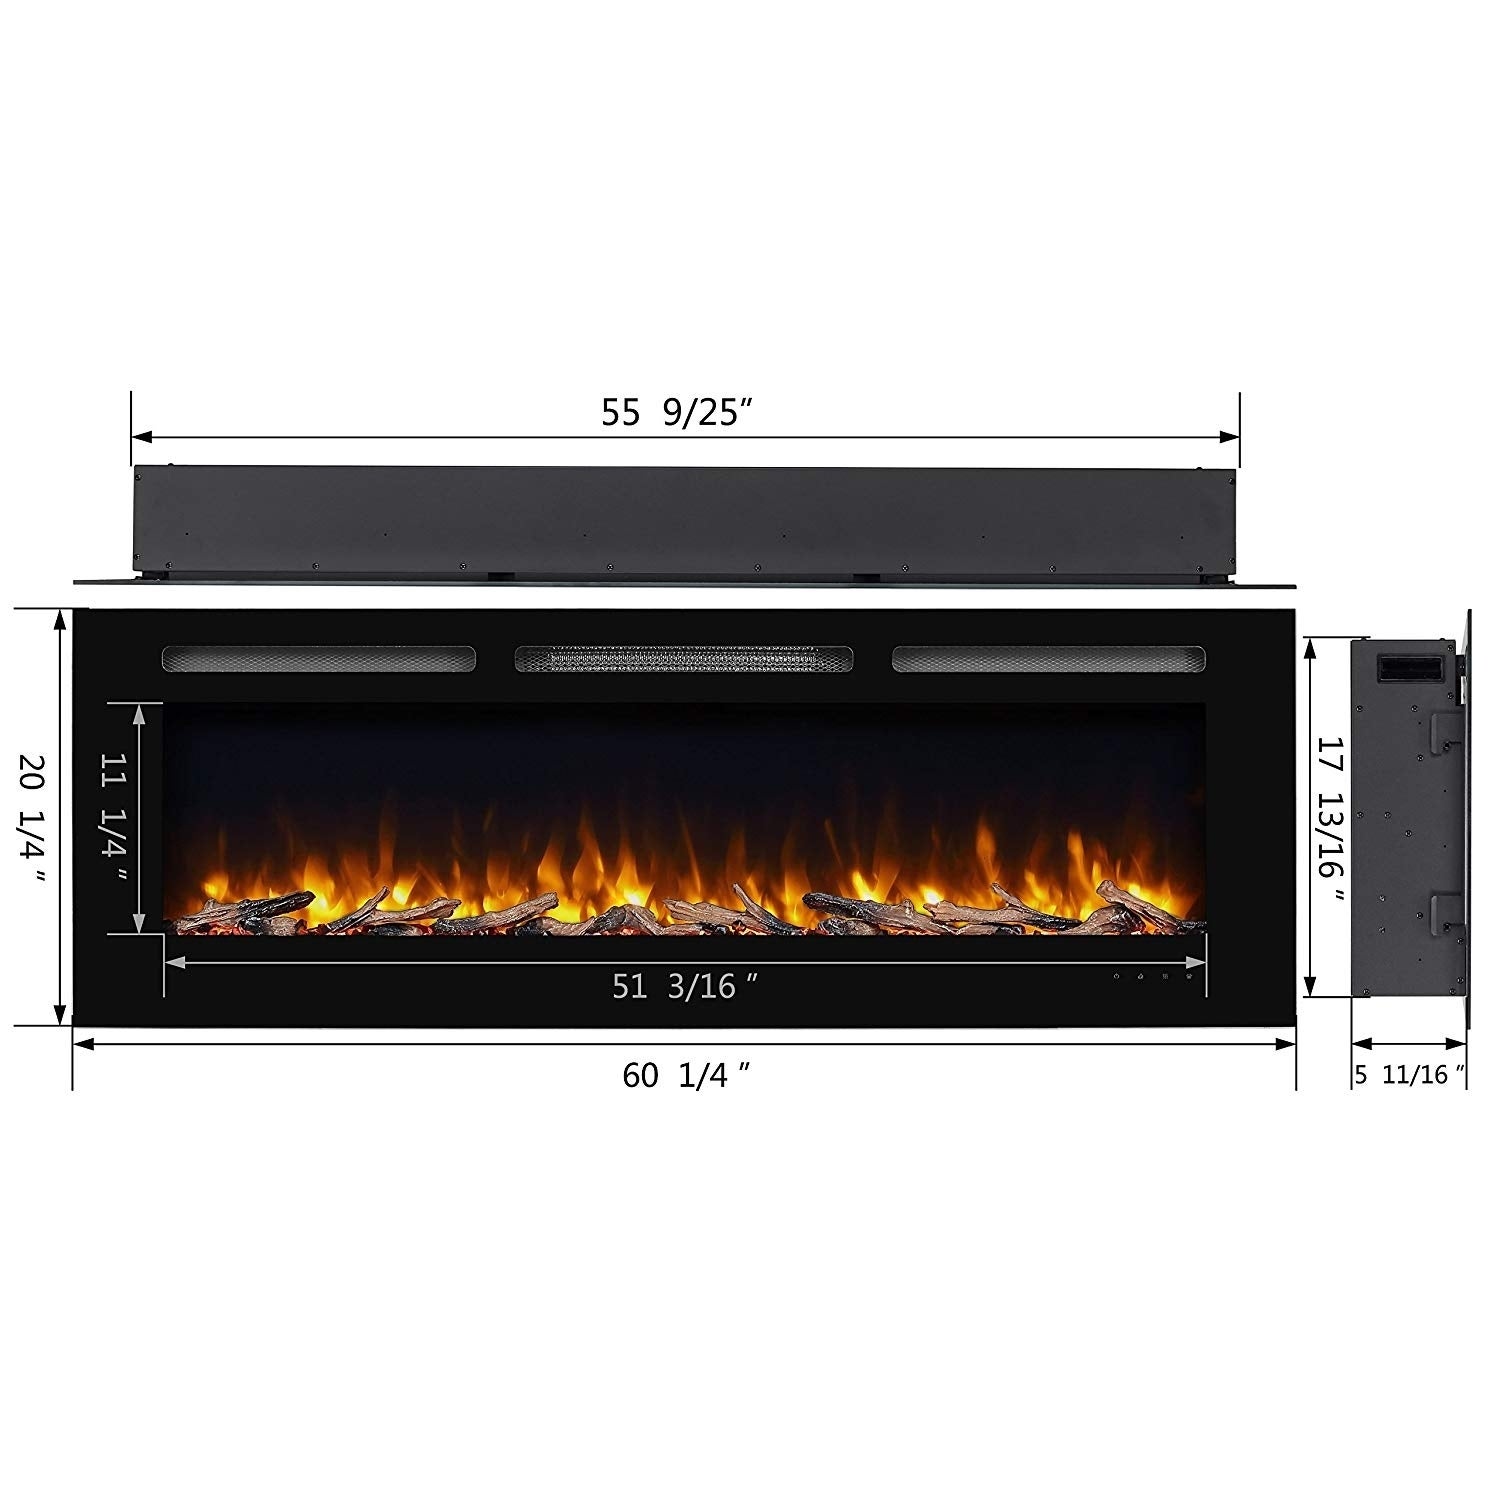 55 Inch Electric Fireplace Luxury 60" Alice In Wall Recessed Electric Fireplace 1500w Black